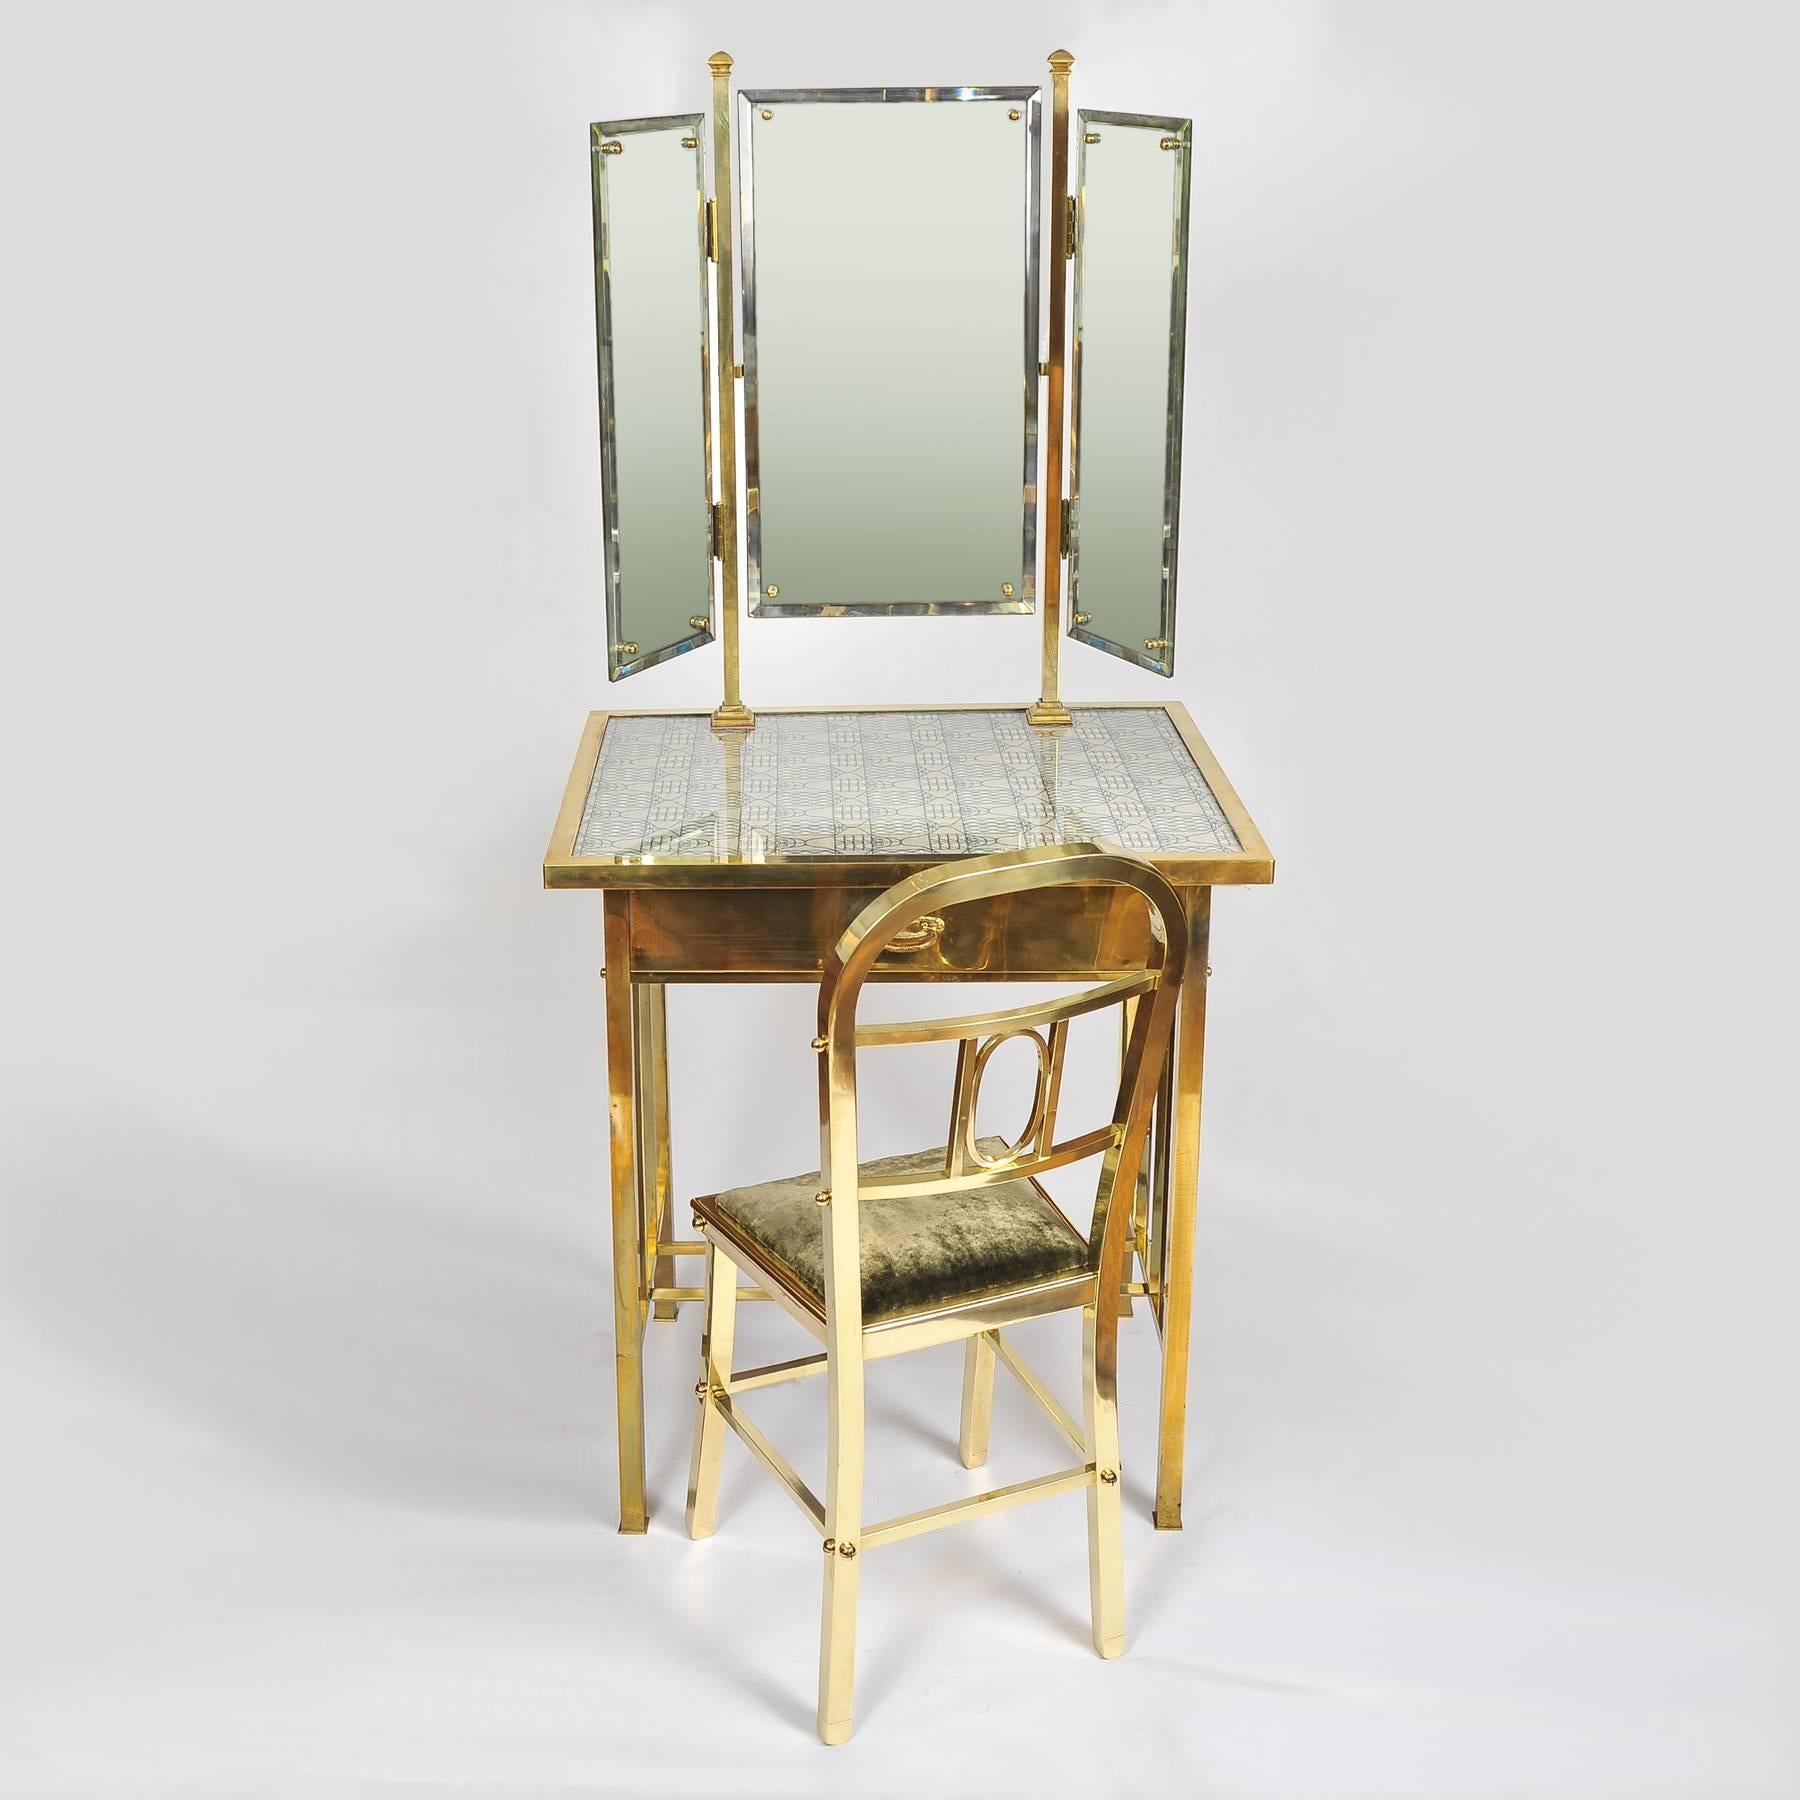 Wonderful brass dressing-table with matching chair, the table with integral triptych mirror and original 1950s embroidered patterned textile, the brass chair upholstered in grey-green velvet. Dressing table: 62.25